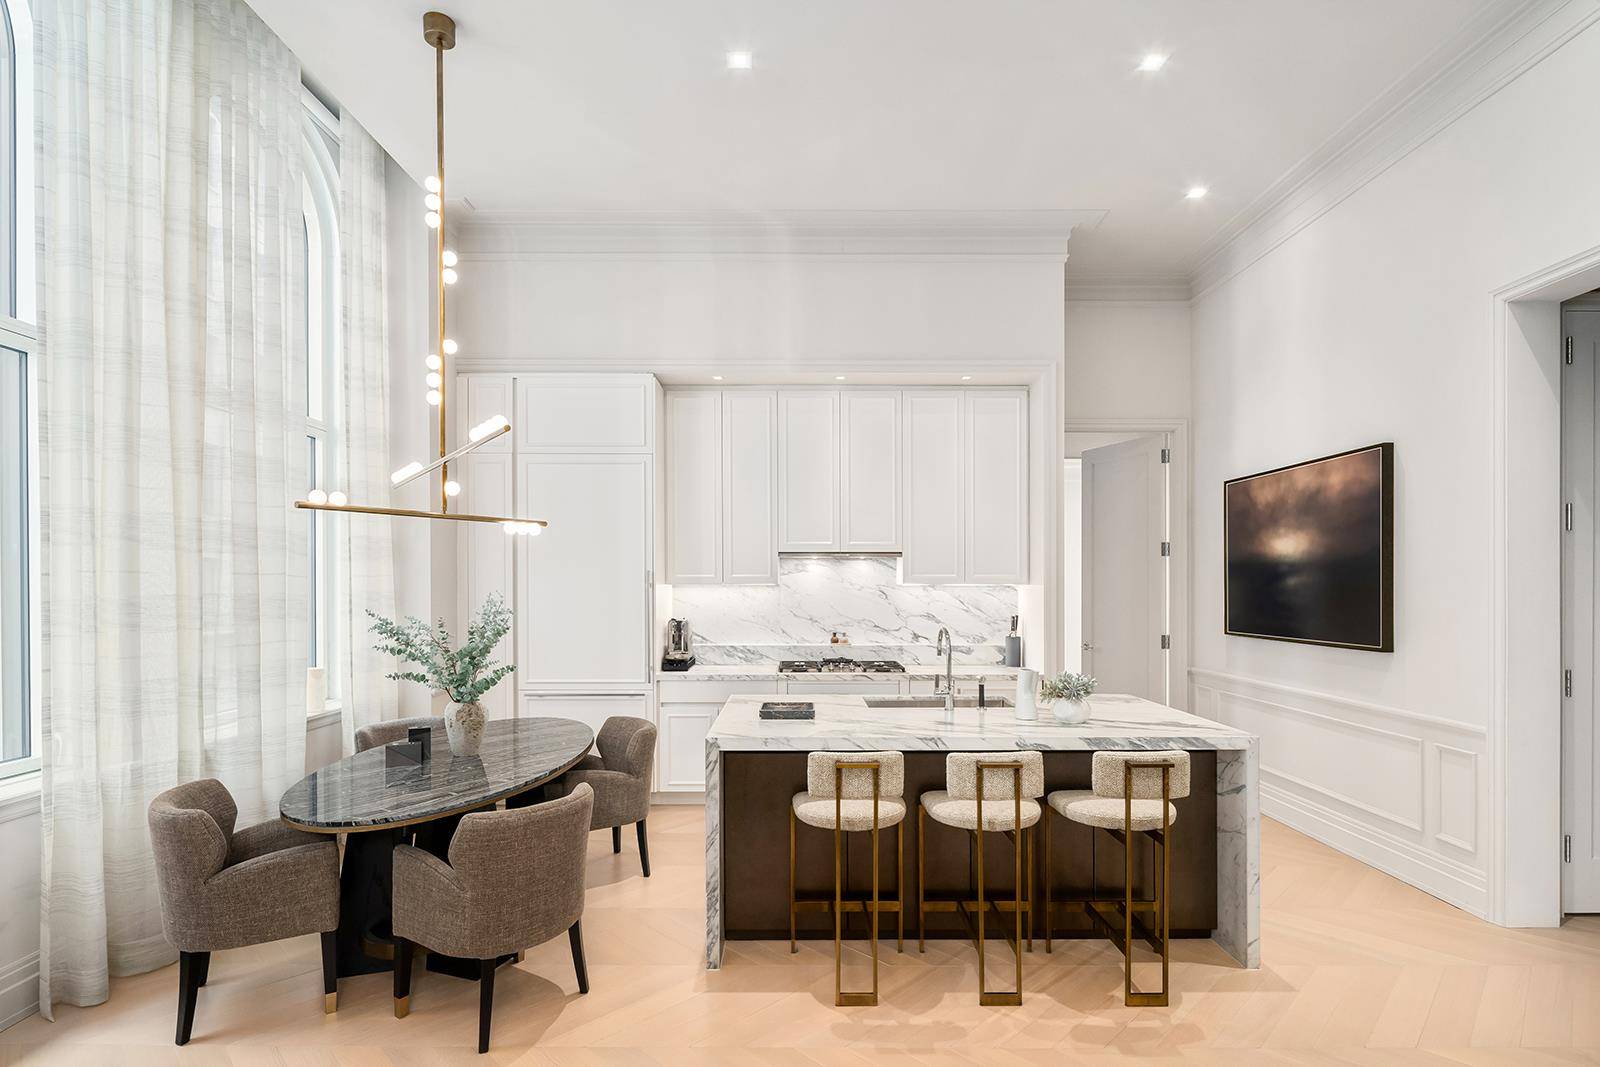 Welcome to 108 Leonard 4B, an impeccably designed oasis in the heart of Tribeca.